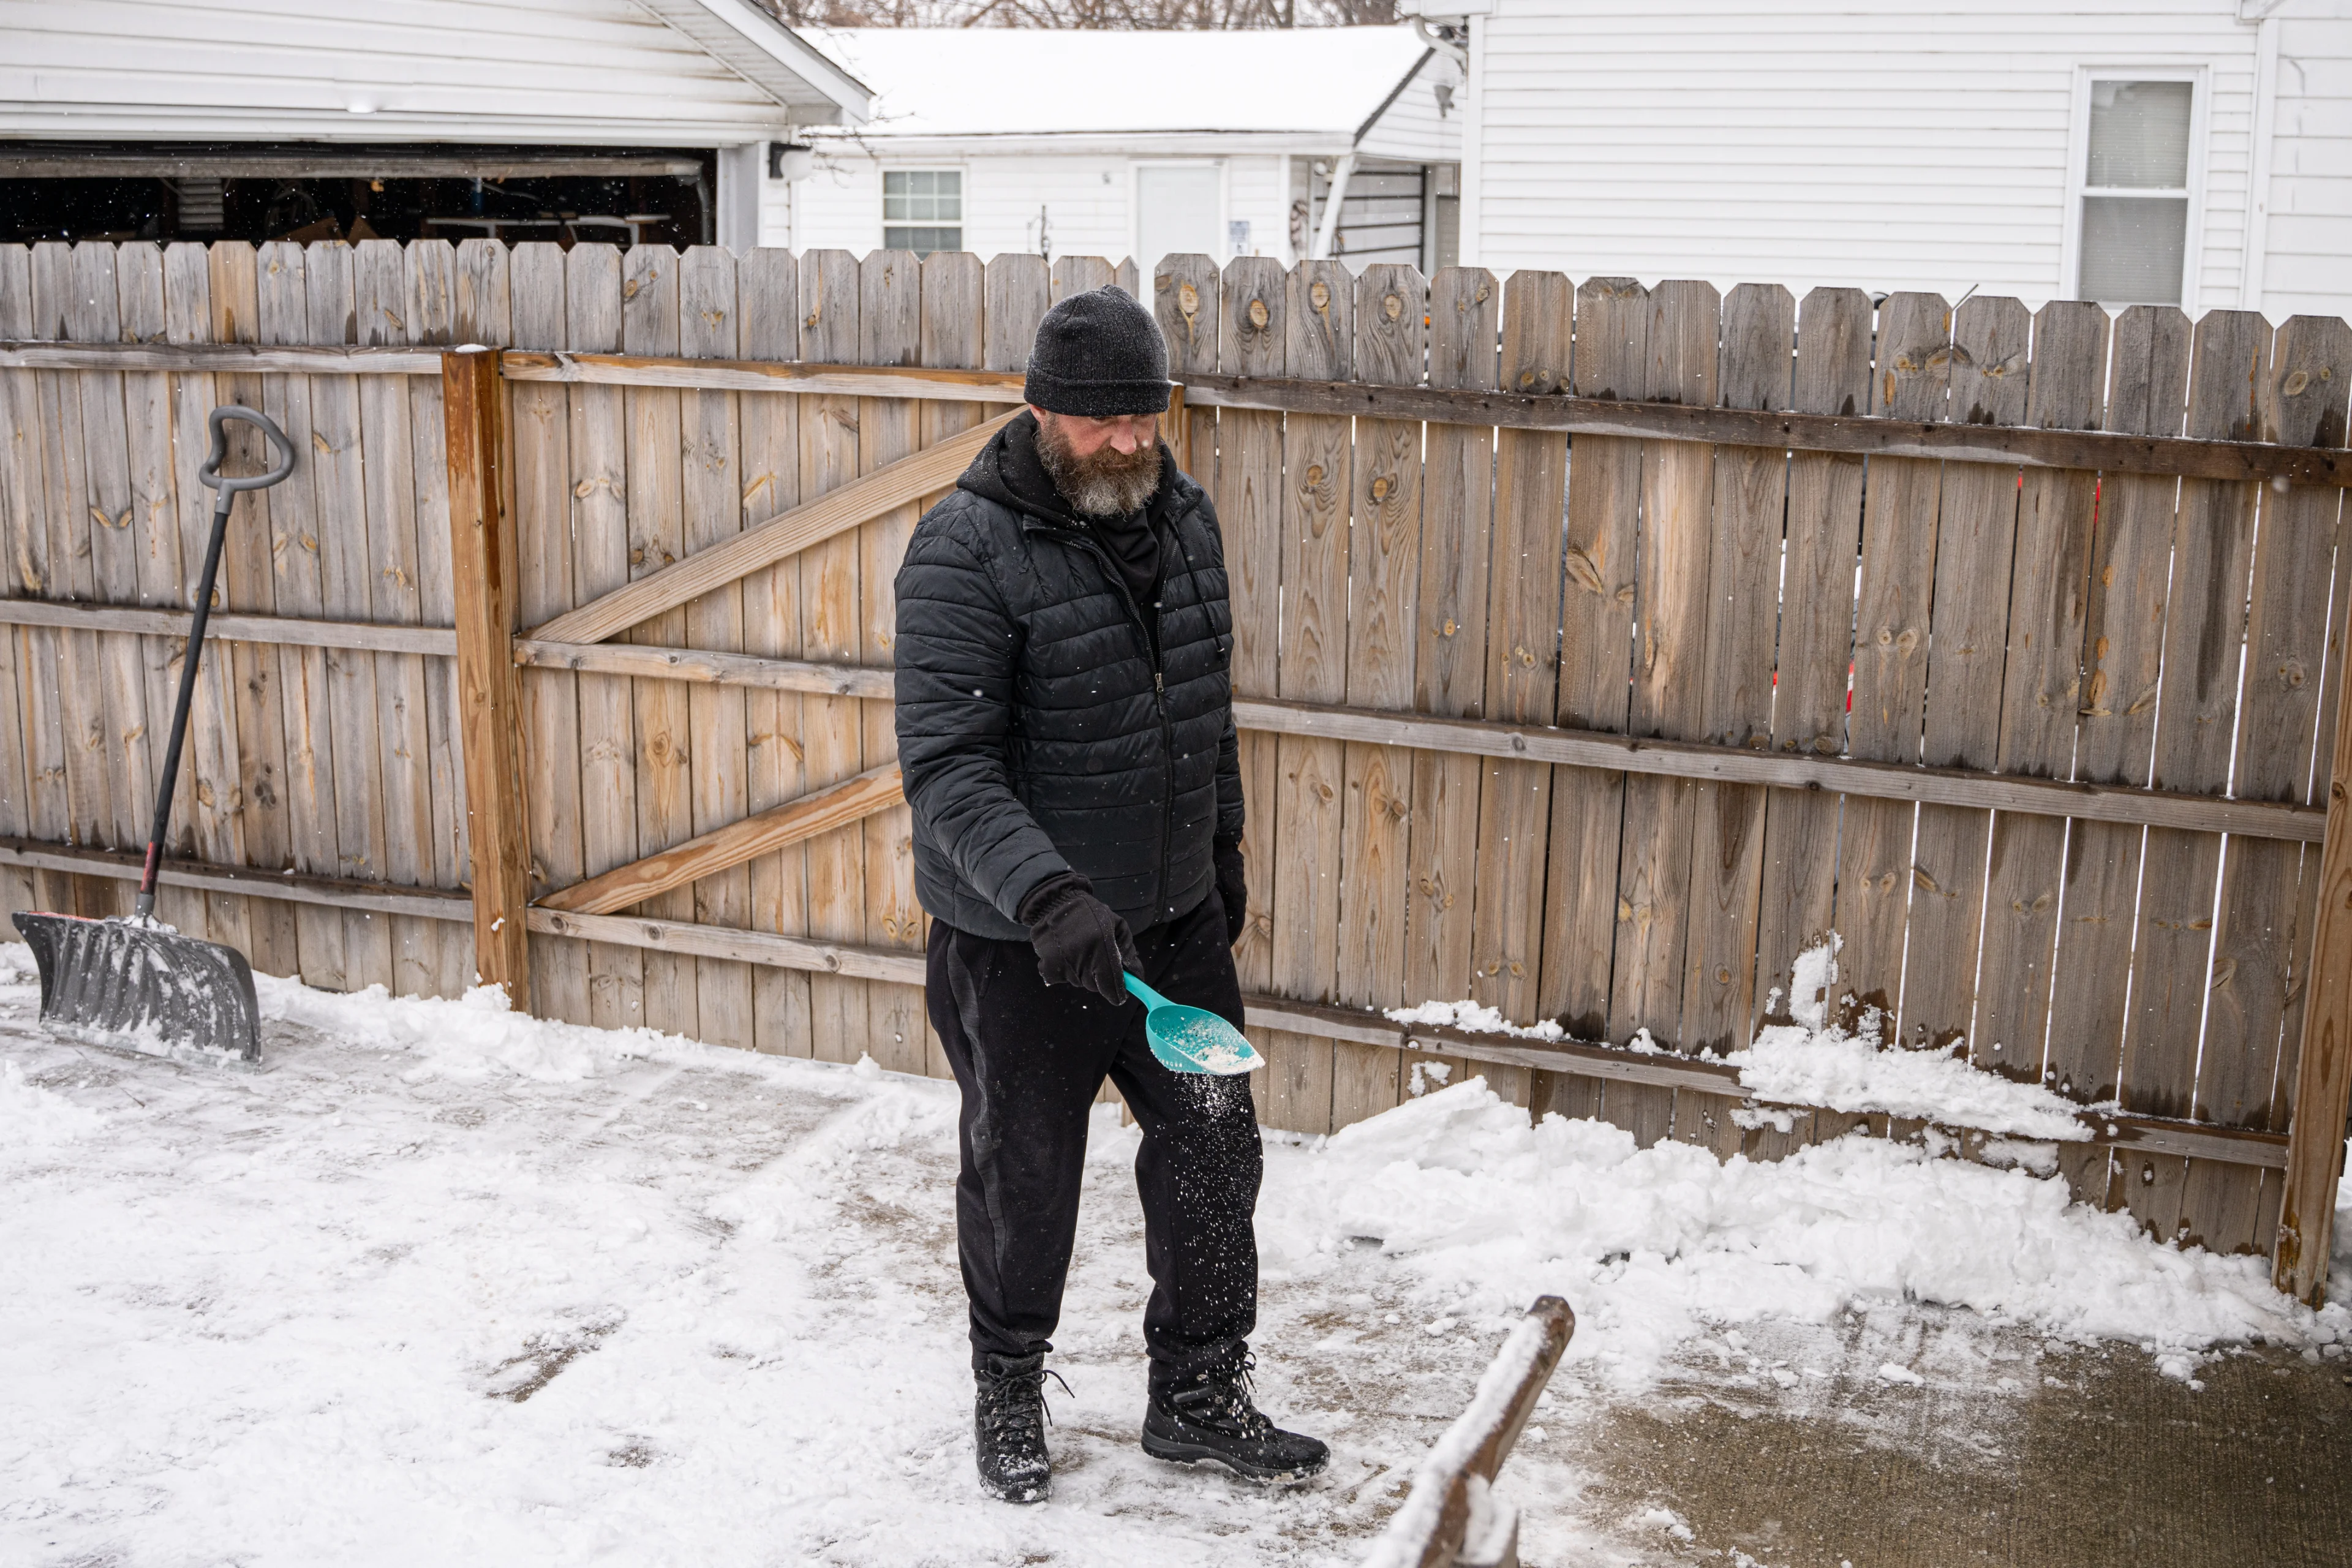 a bearded man salting concrete to melt snow and prevent ice from forming